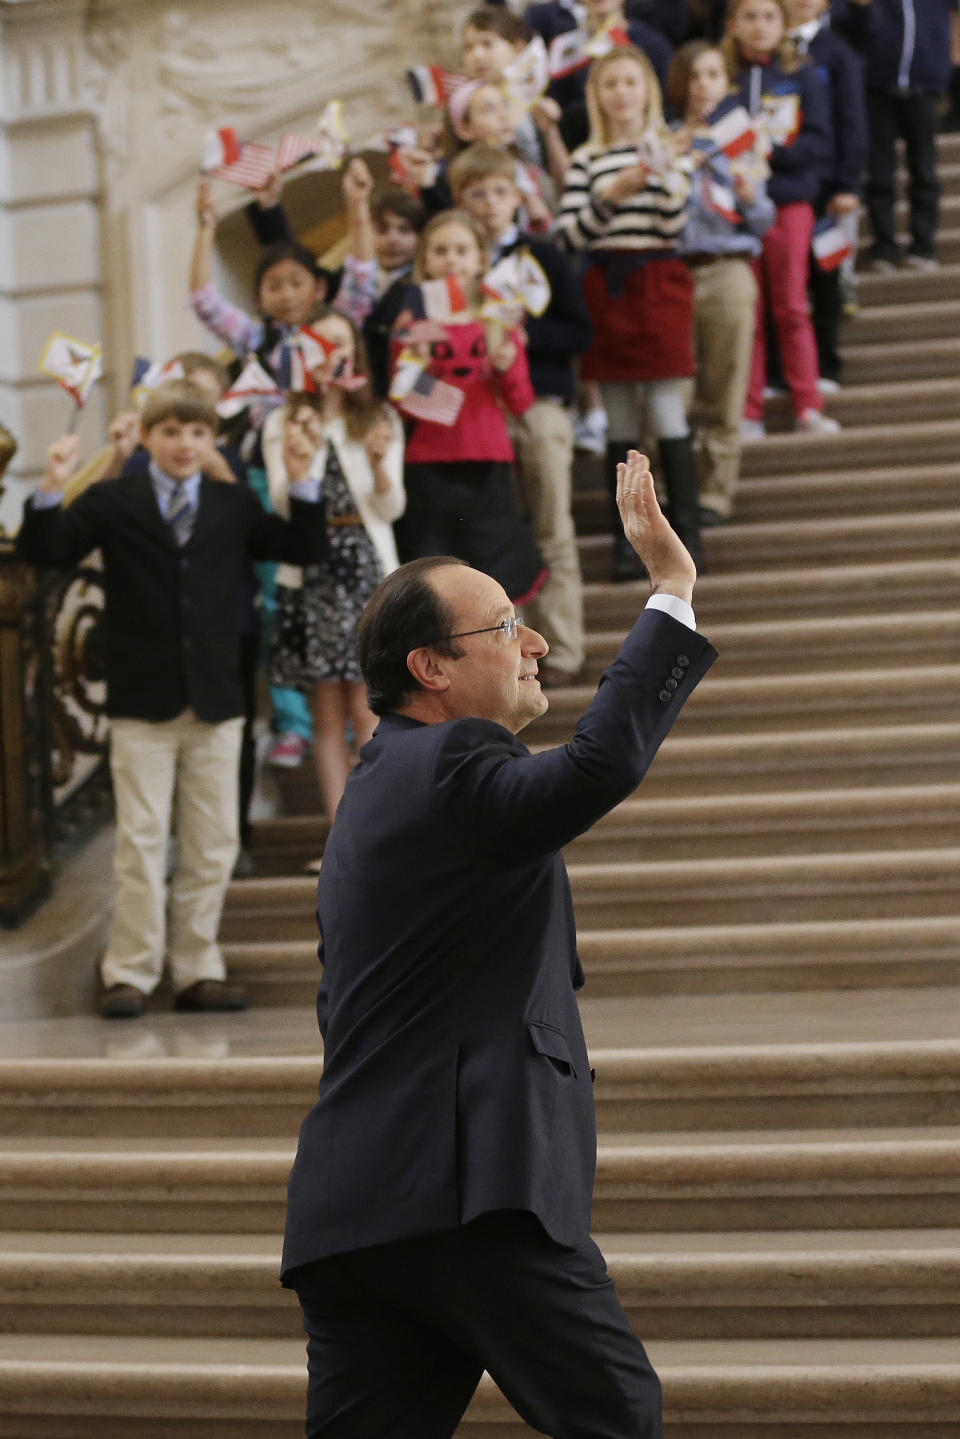 French president Francois Hollande waves as he arrives at city hall on Wednesday, Feb. 12, 2014, in San Francisco. The French president visited San Francisco to meet politicians, lunch with Silicon Valley tech executives and inaugurate a new U.S.-French Tech Hub. (AP Photo/Marcio Jose Sanchez)